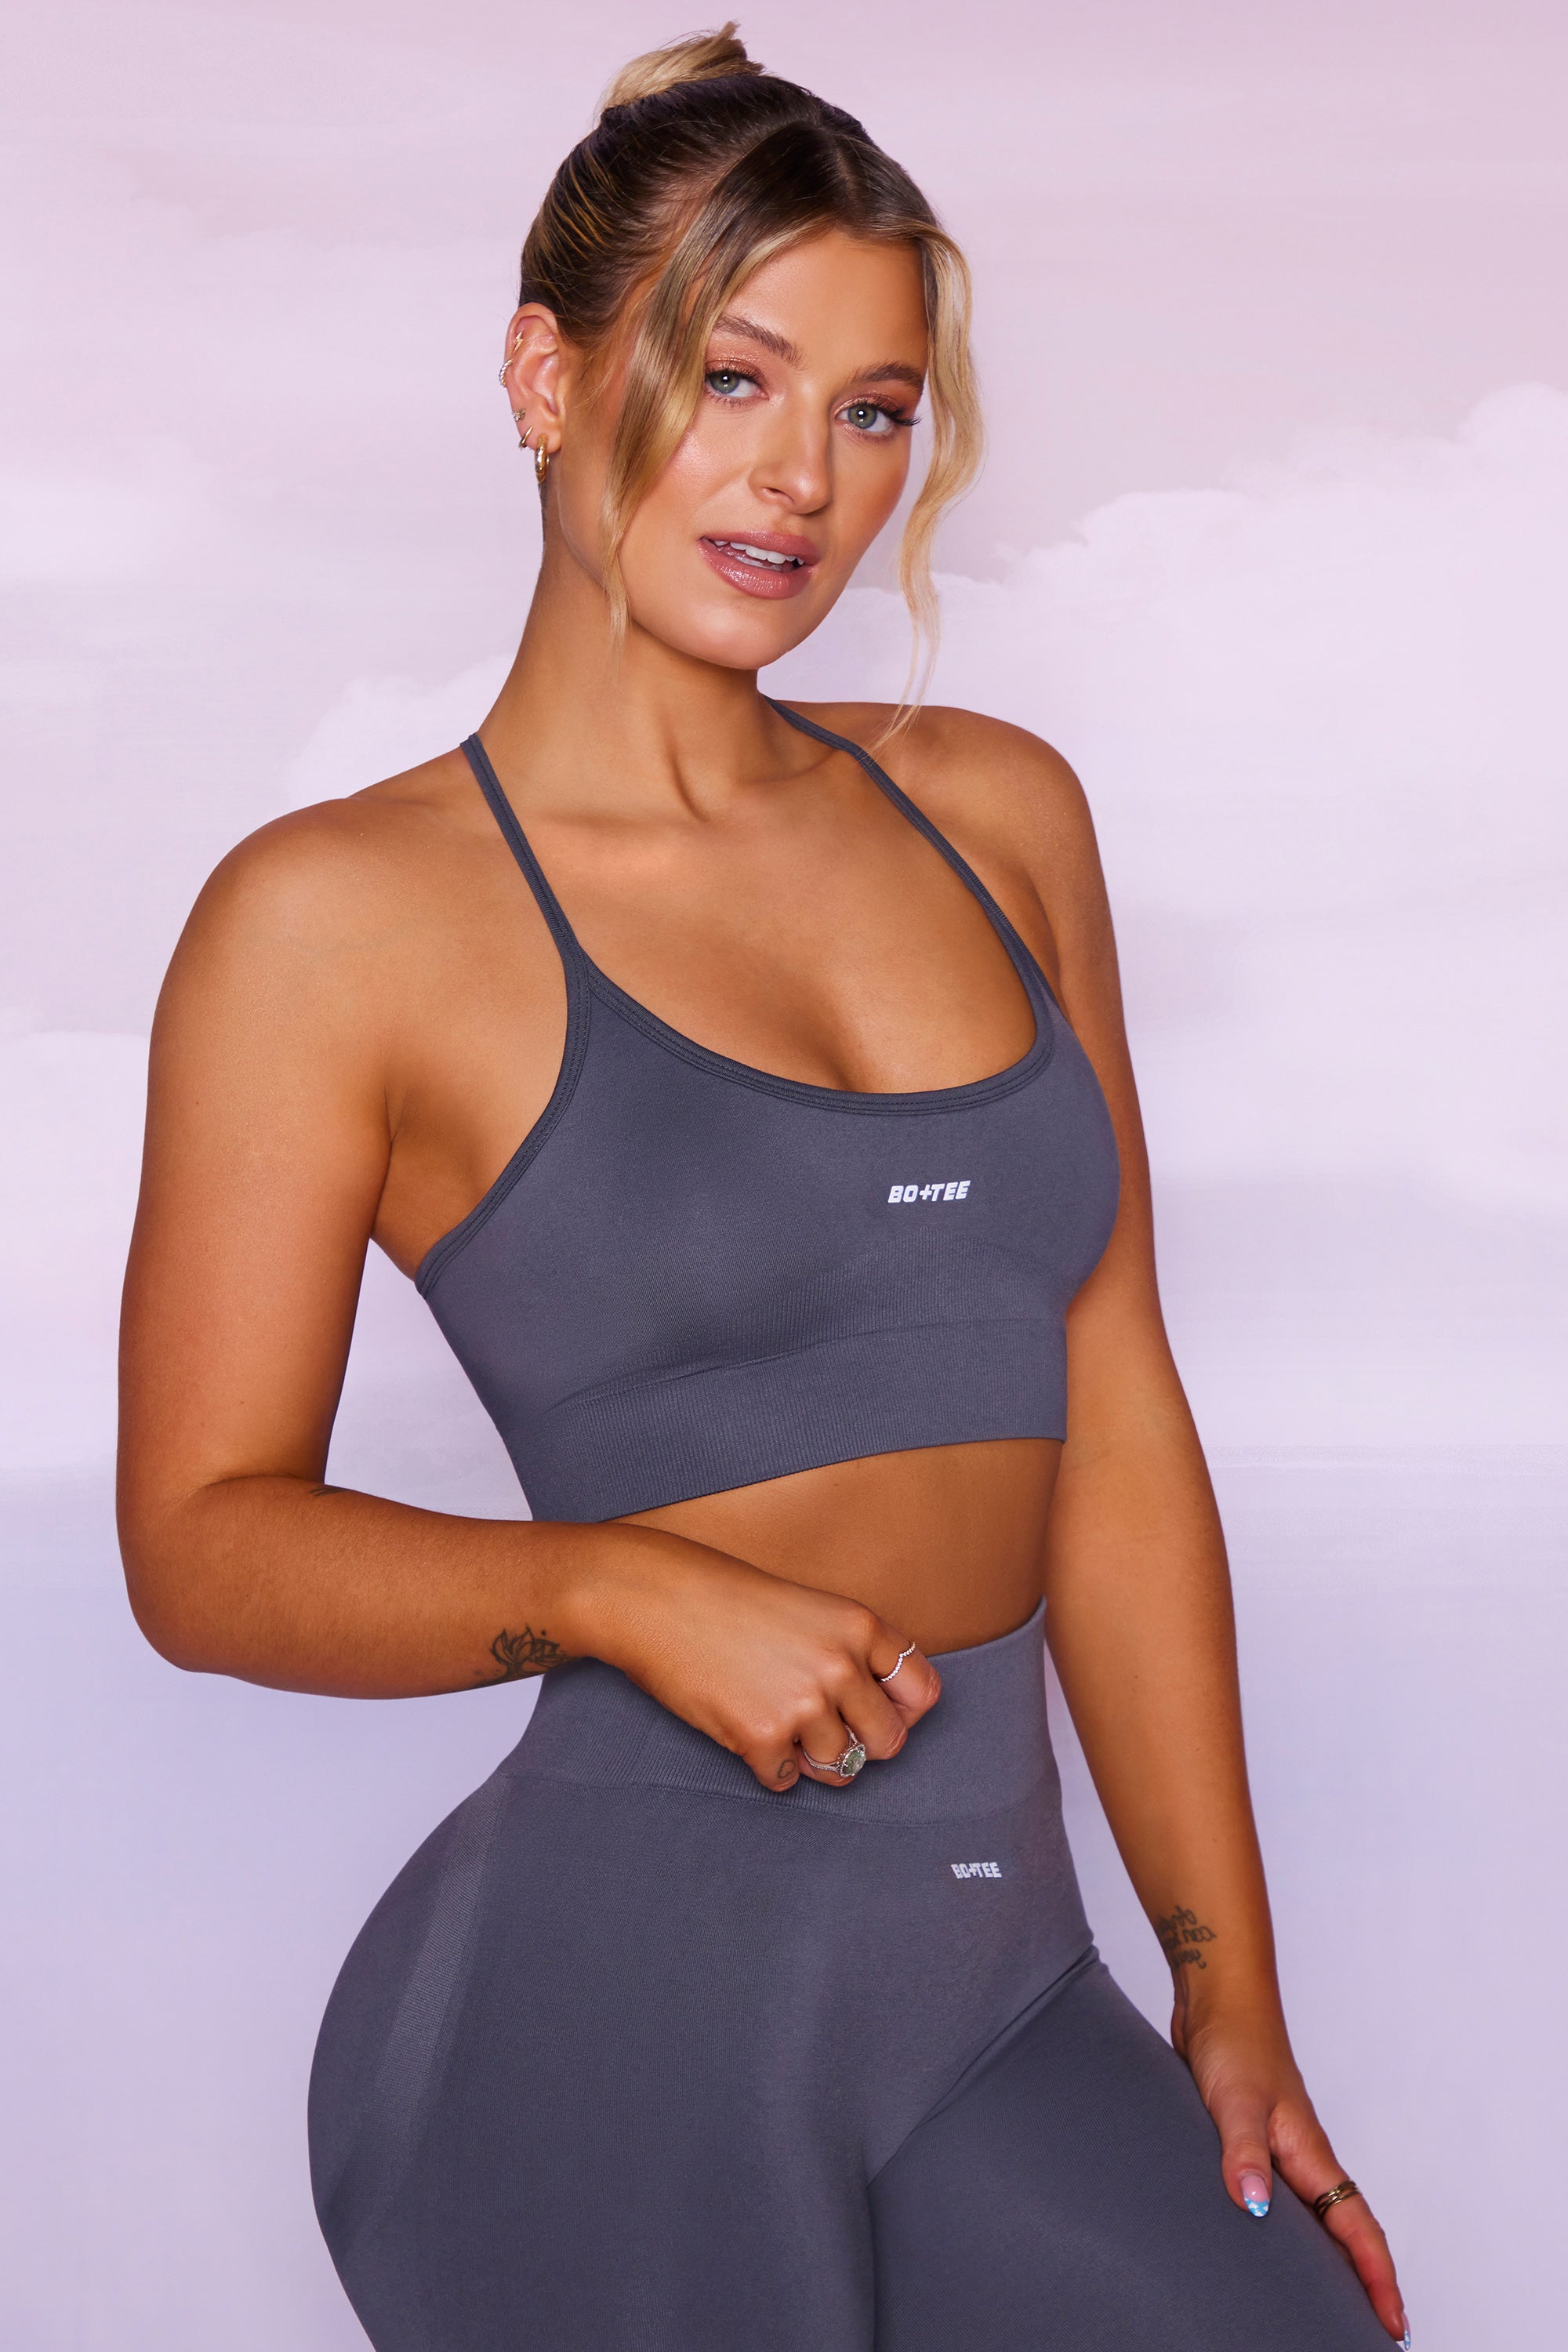 Bo+Tee Oh Polly Petite Ribbed Leggings (XS) and Sports Bra (S) in